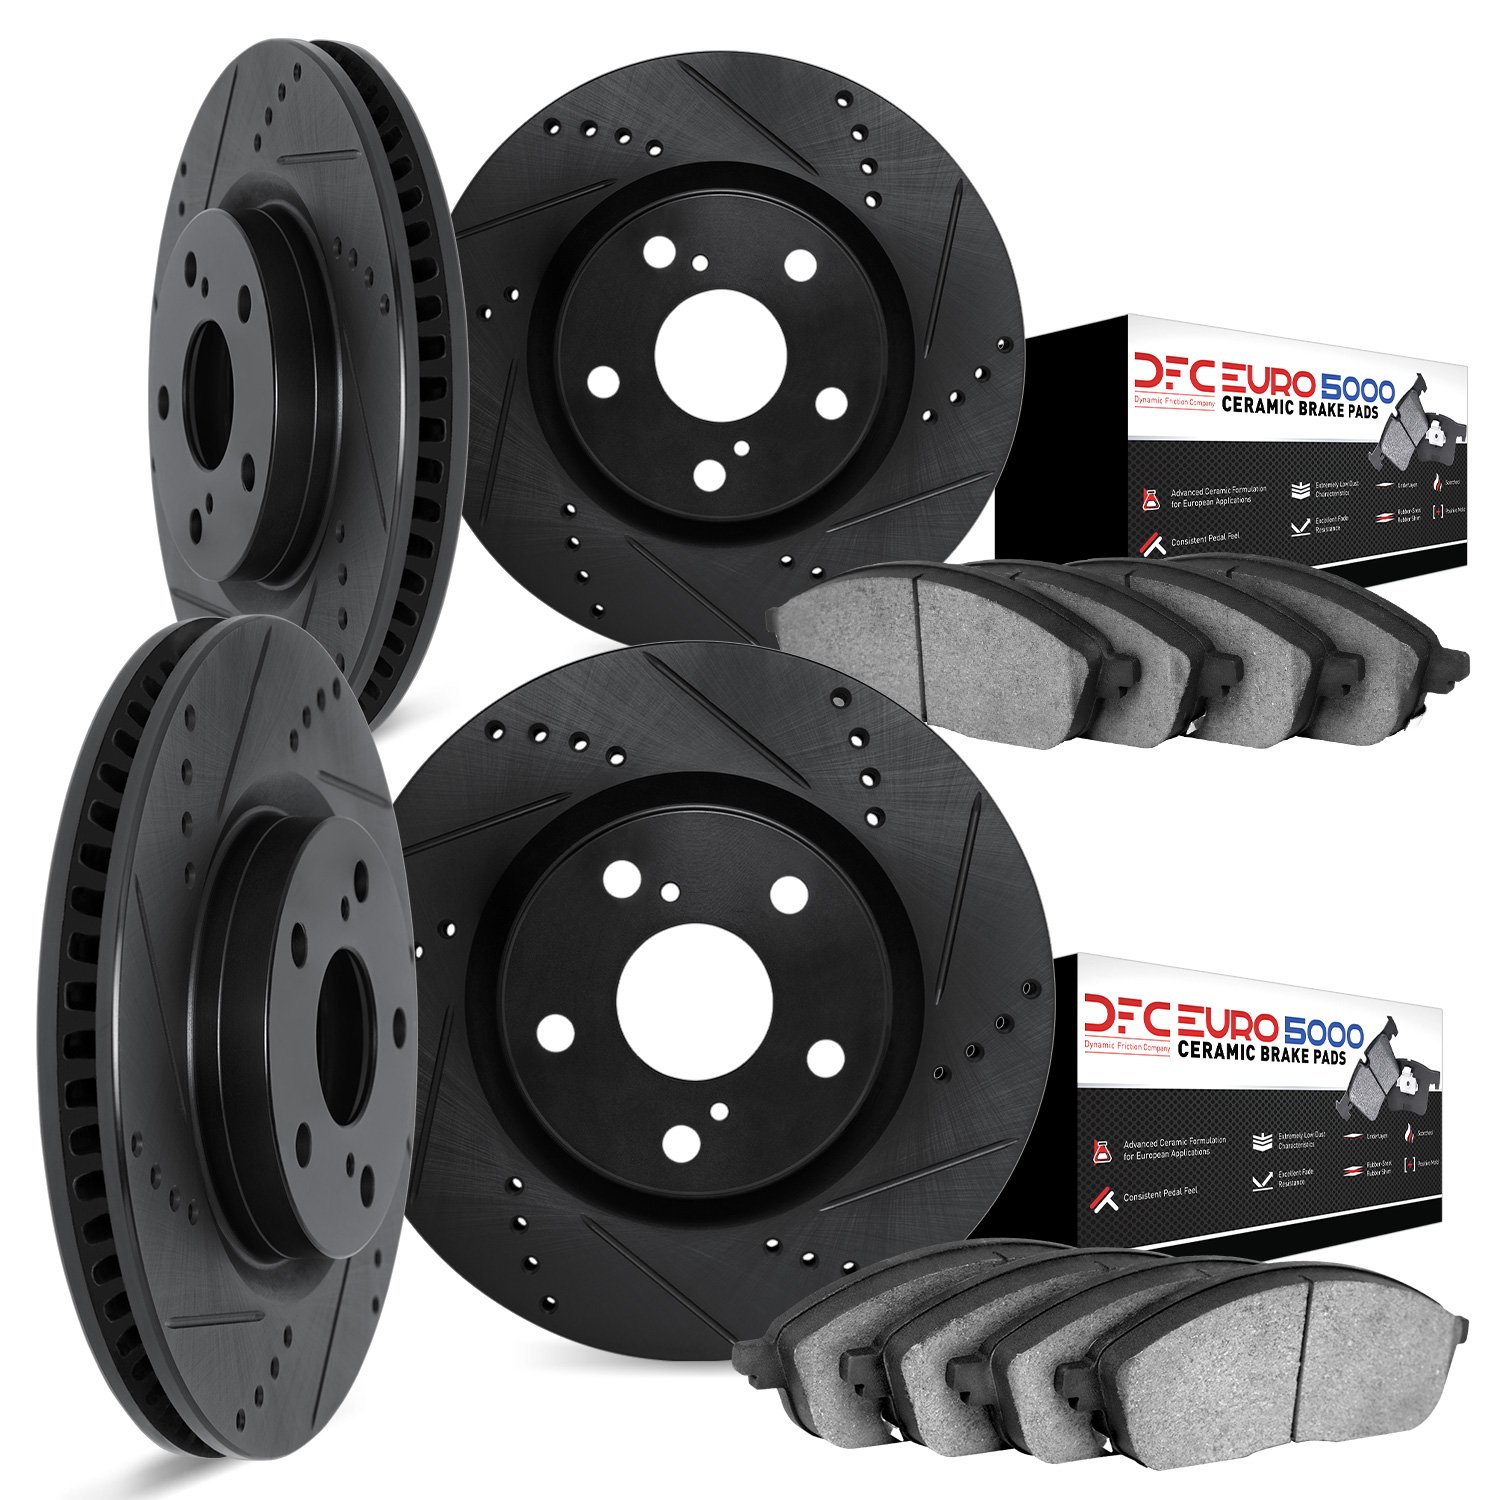 8604-31035 Drilled/Slotted Brake Rotors w/5000 Euro Ceramic Brake Pads Kit [Black], 2007-2019 BMW, Position: Front and Rear